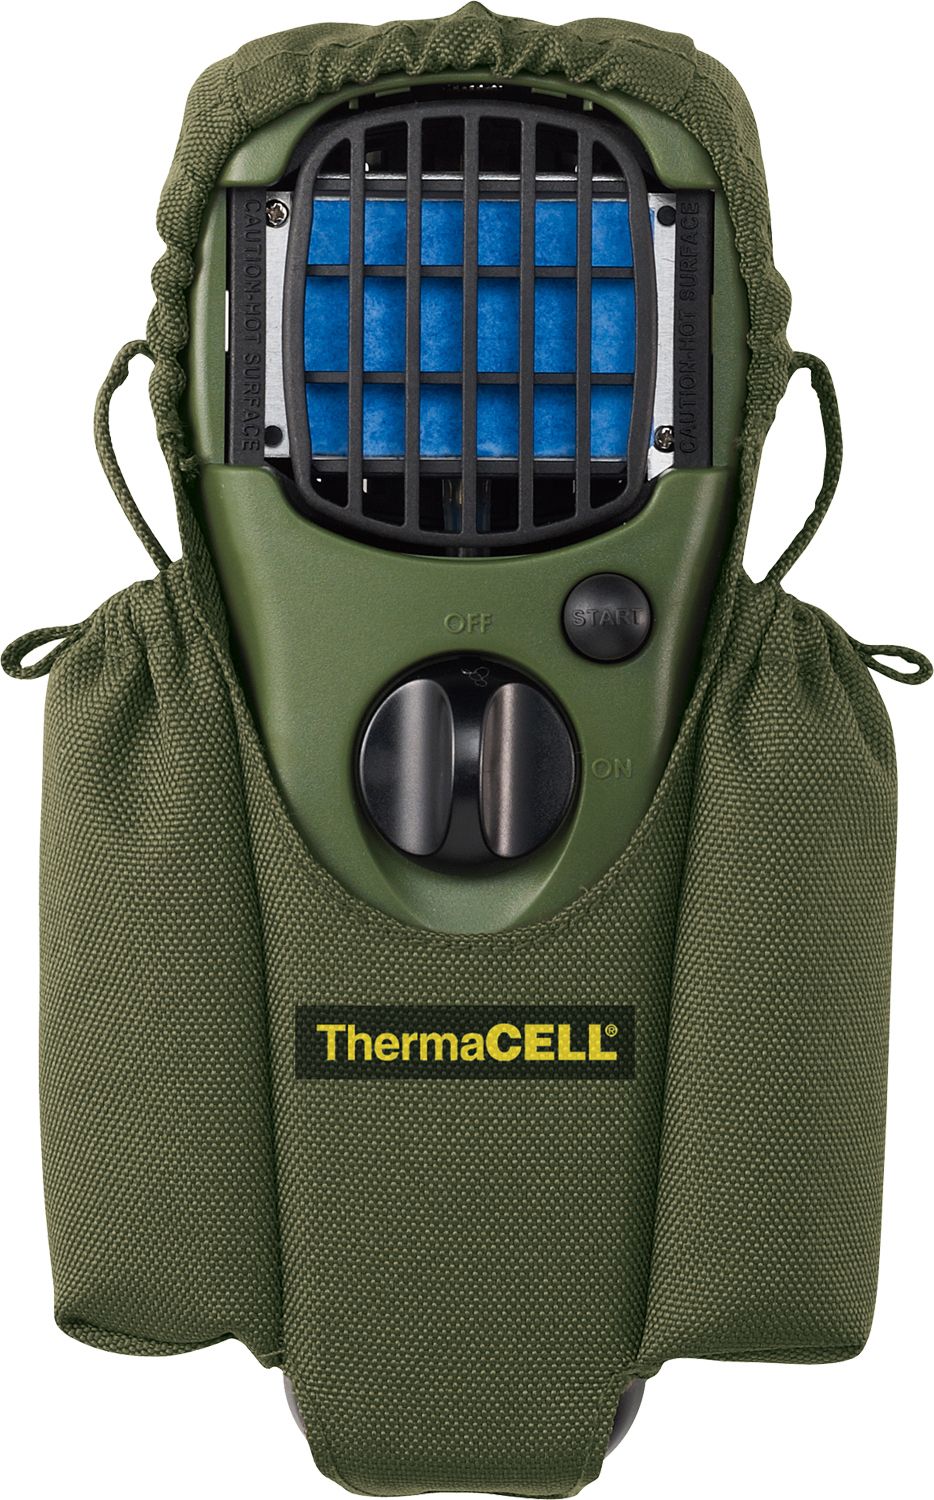 thermacell mosquito repellent